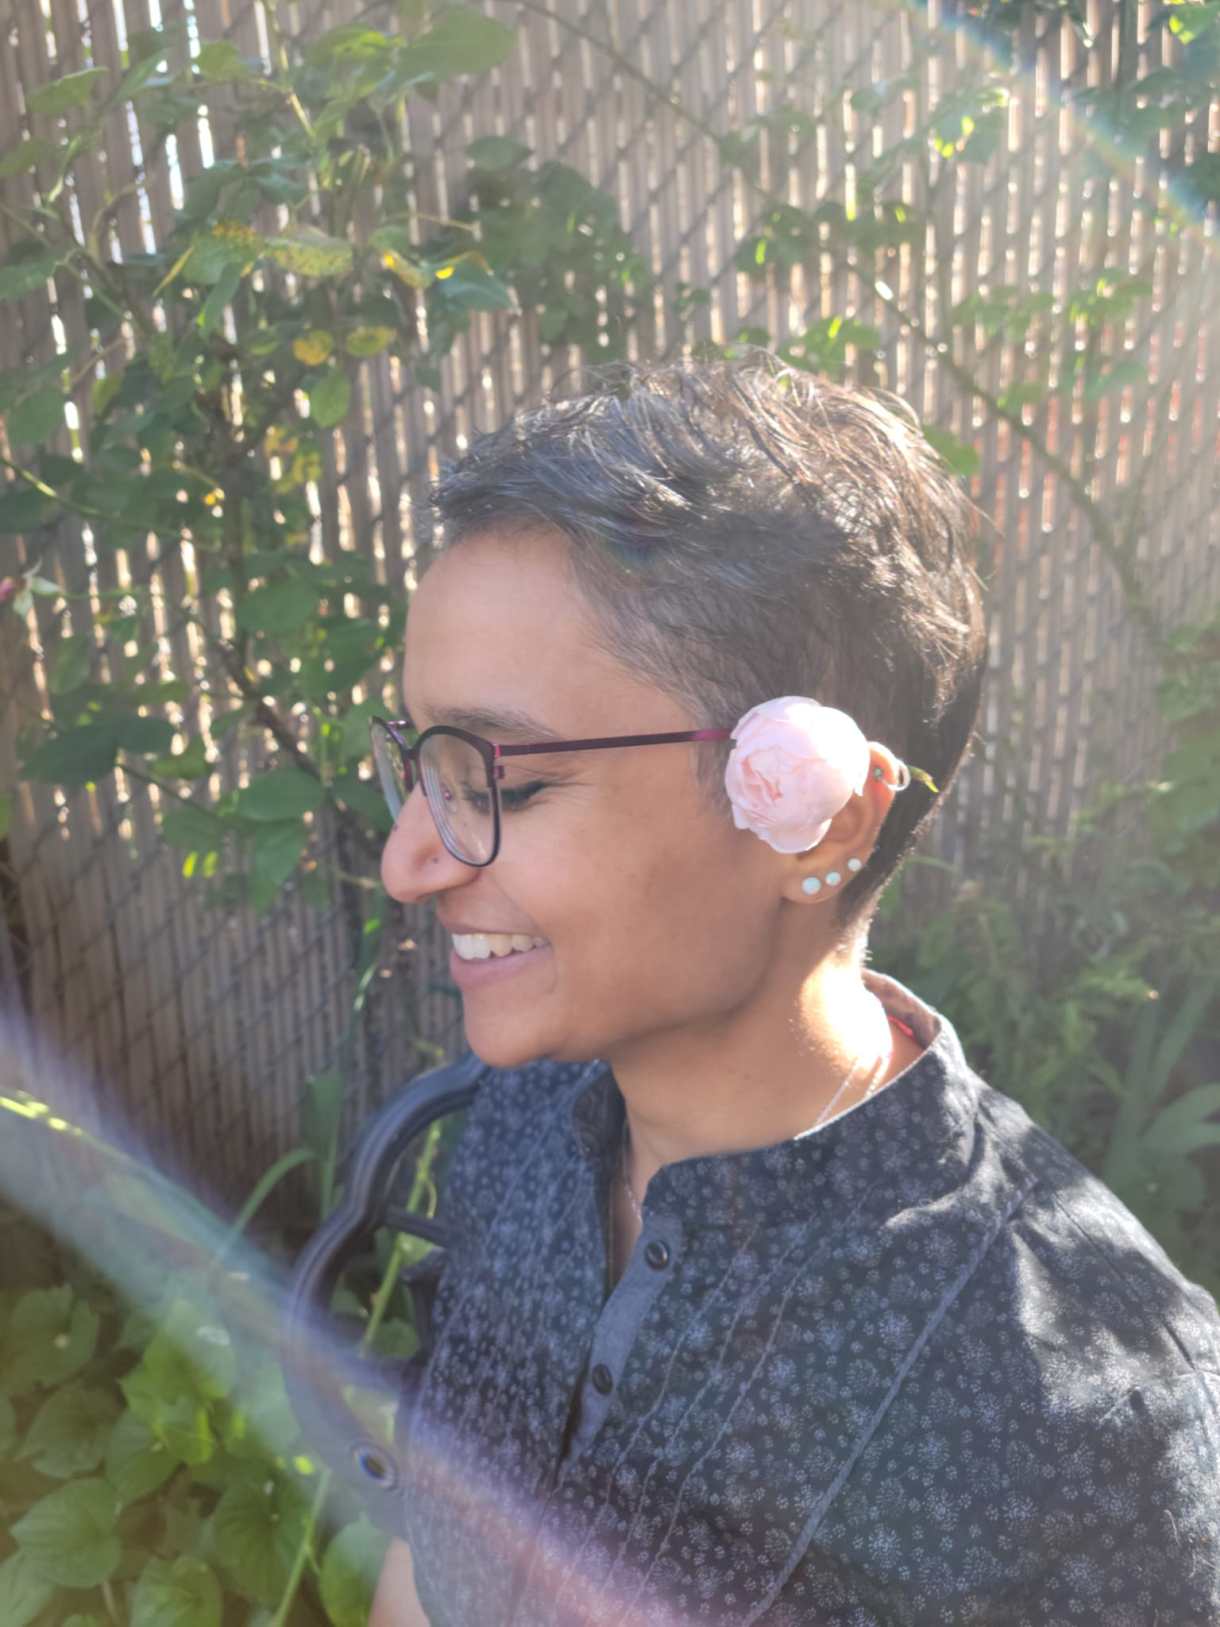 Himani is smiling in sunlight in front of a trellis covered in vines, with a light pink or write rose tucked above her ear. She is a south Asian woman with short dark salt and pepper hair, glasses, and several ear piercings. She is wearing a pattenred shirt.